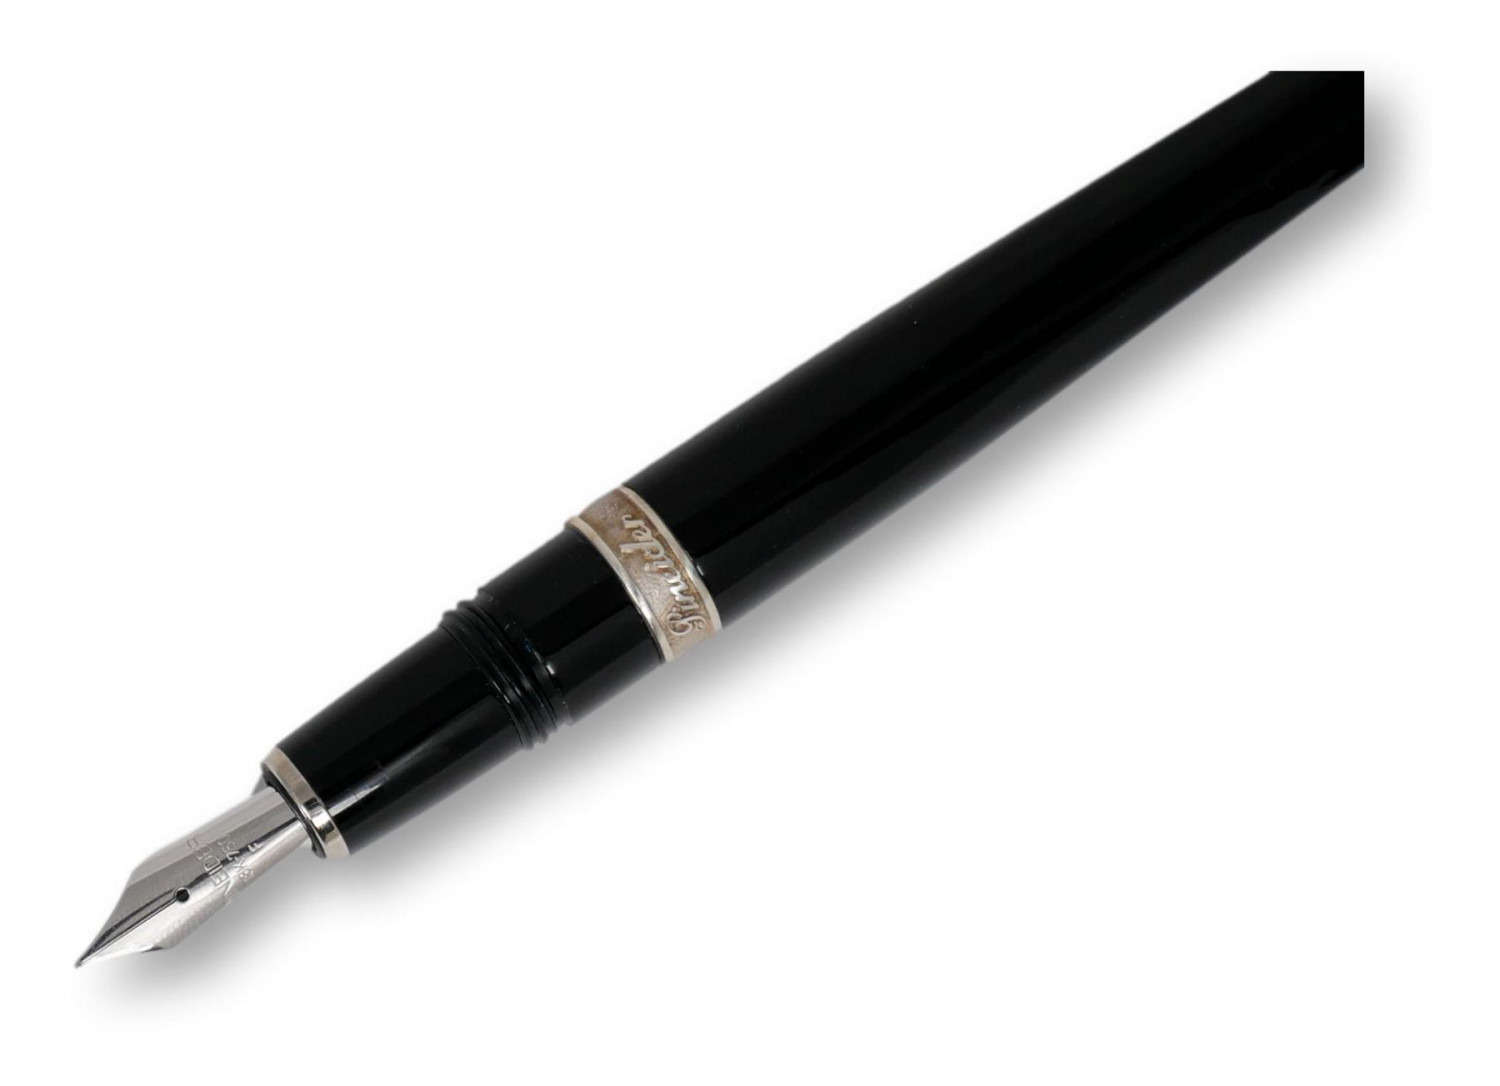 Fountain pen, collection 1949, with silver details and Pineider logo